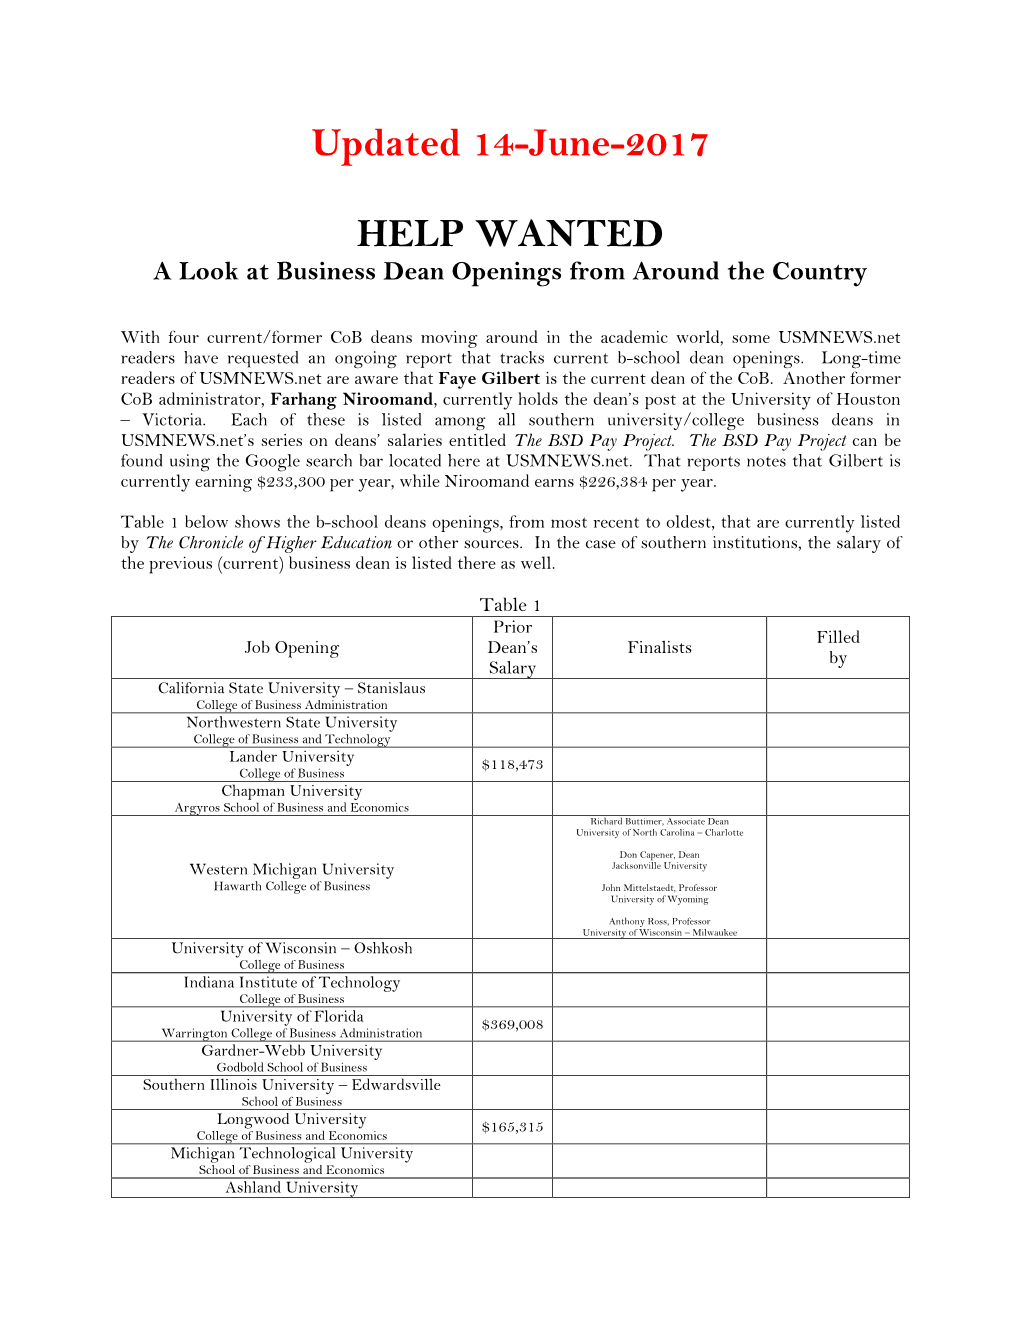 Updated 14-June-2017 HELP WANTED a Look At